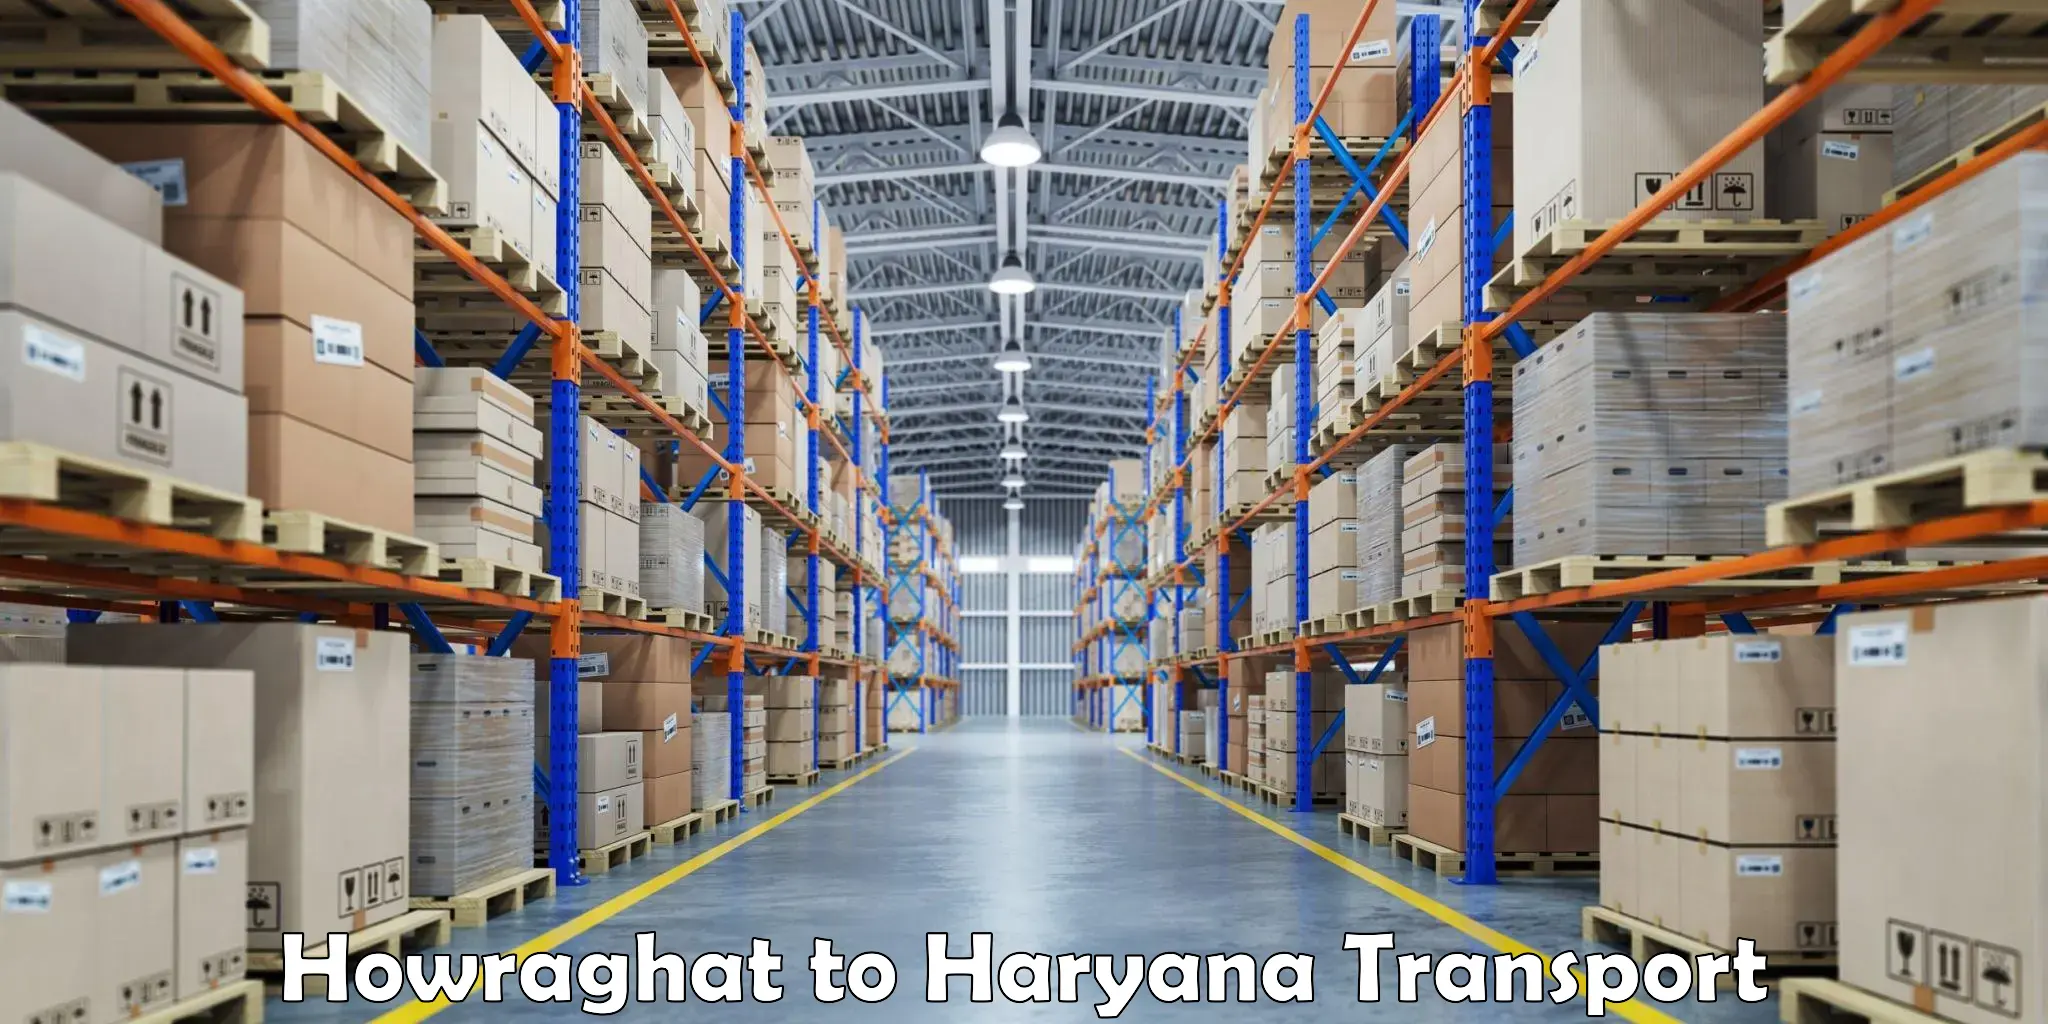 Container transport service Howraghat to Shahabad Markanda